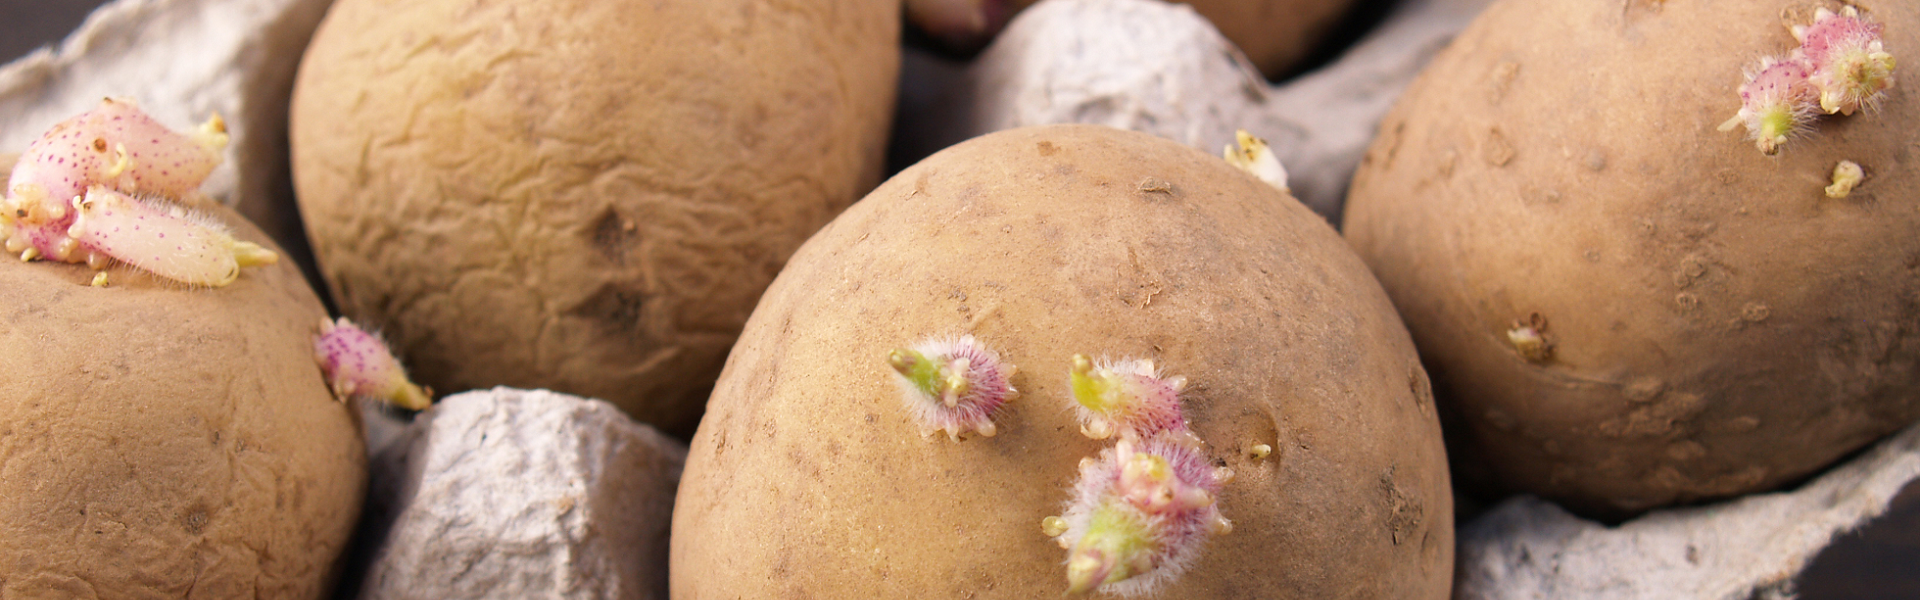 Four Dobies seed potatoes are shown in close-up in an egg box, beginning to grow shoots (chitting) prior to planting